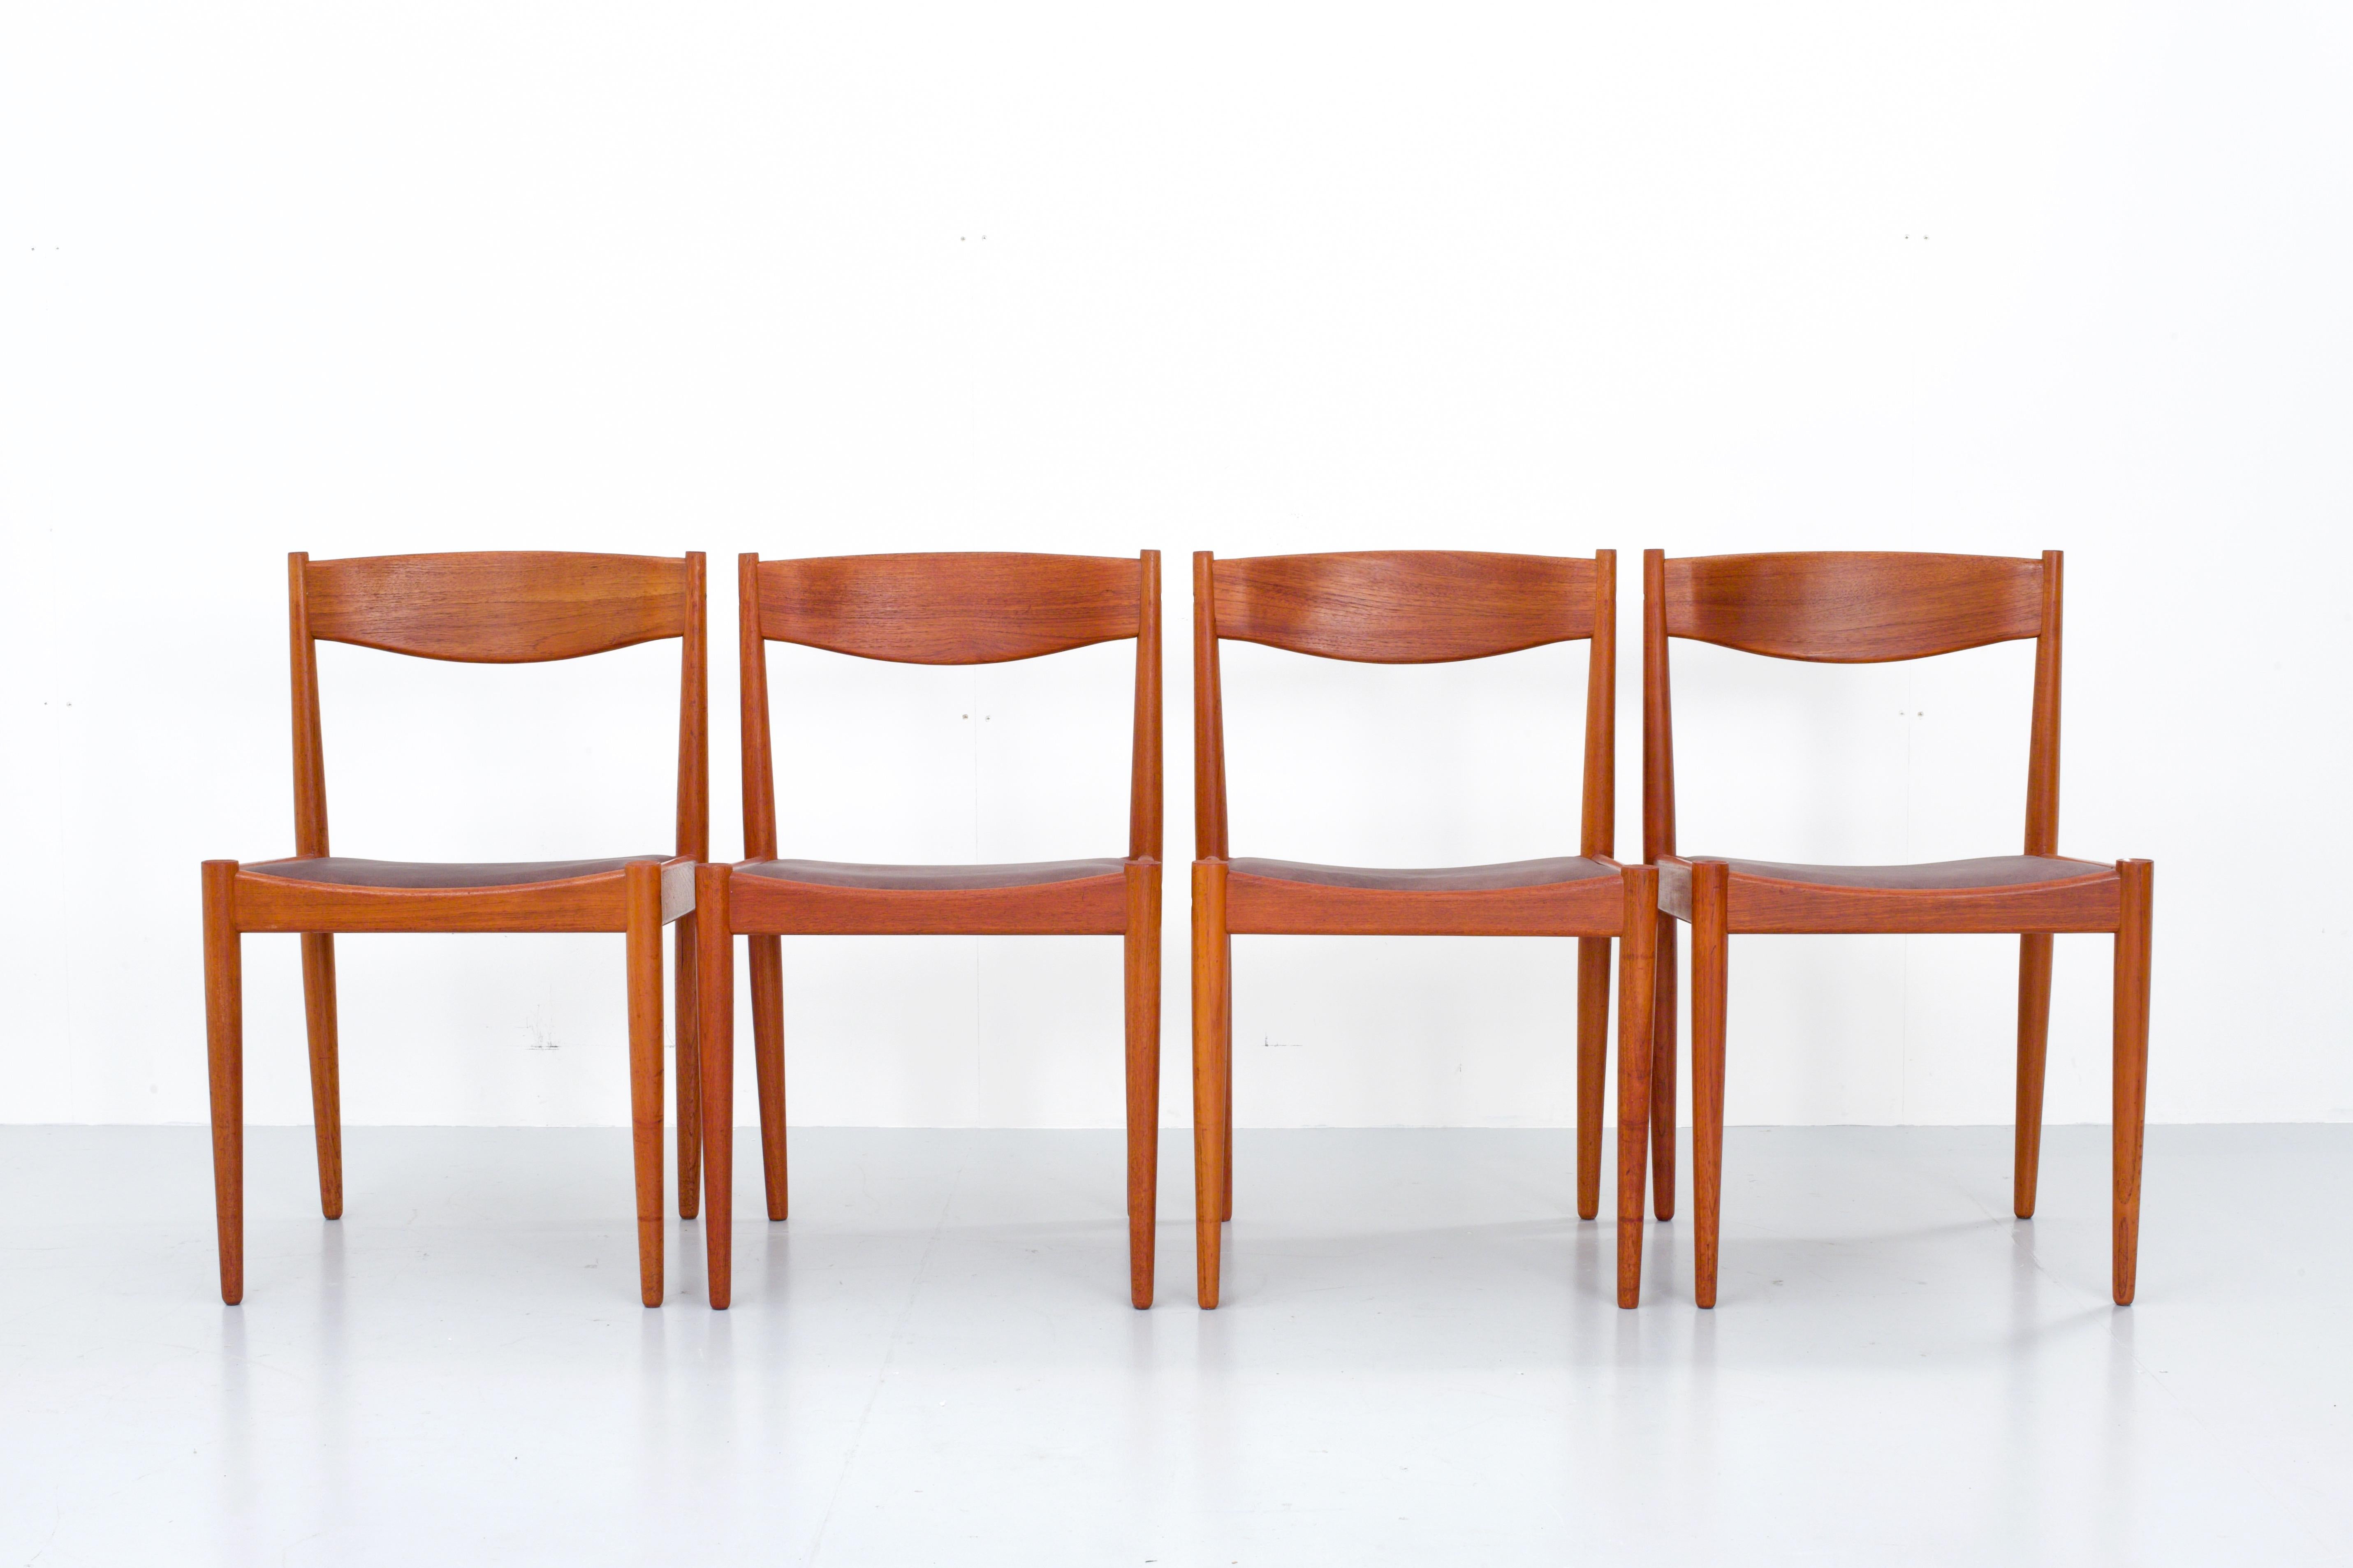 Set of 4 unpretentious and well-known chairs by H.W. Klein for Bramin Møbler. The legs are tapered towards the top and have a small dimple on the shoulder and the knee as detail. The chairs are not very heavy but are quite sturdy because of its